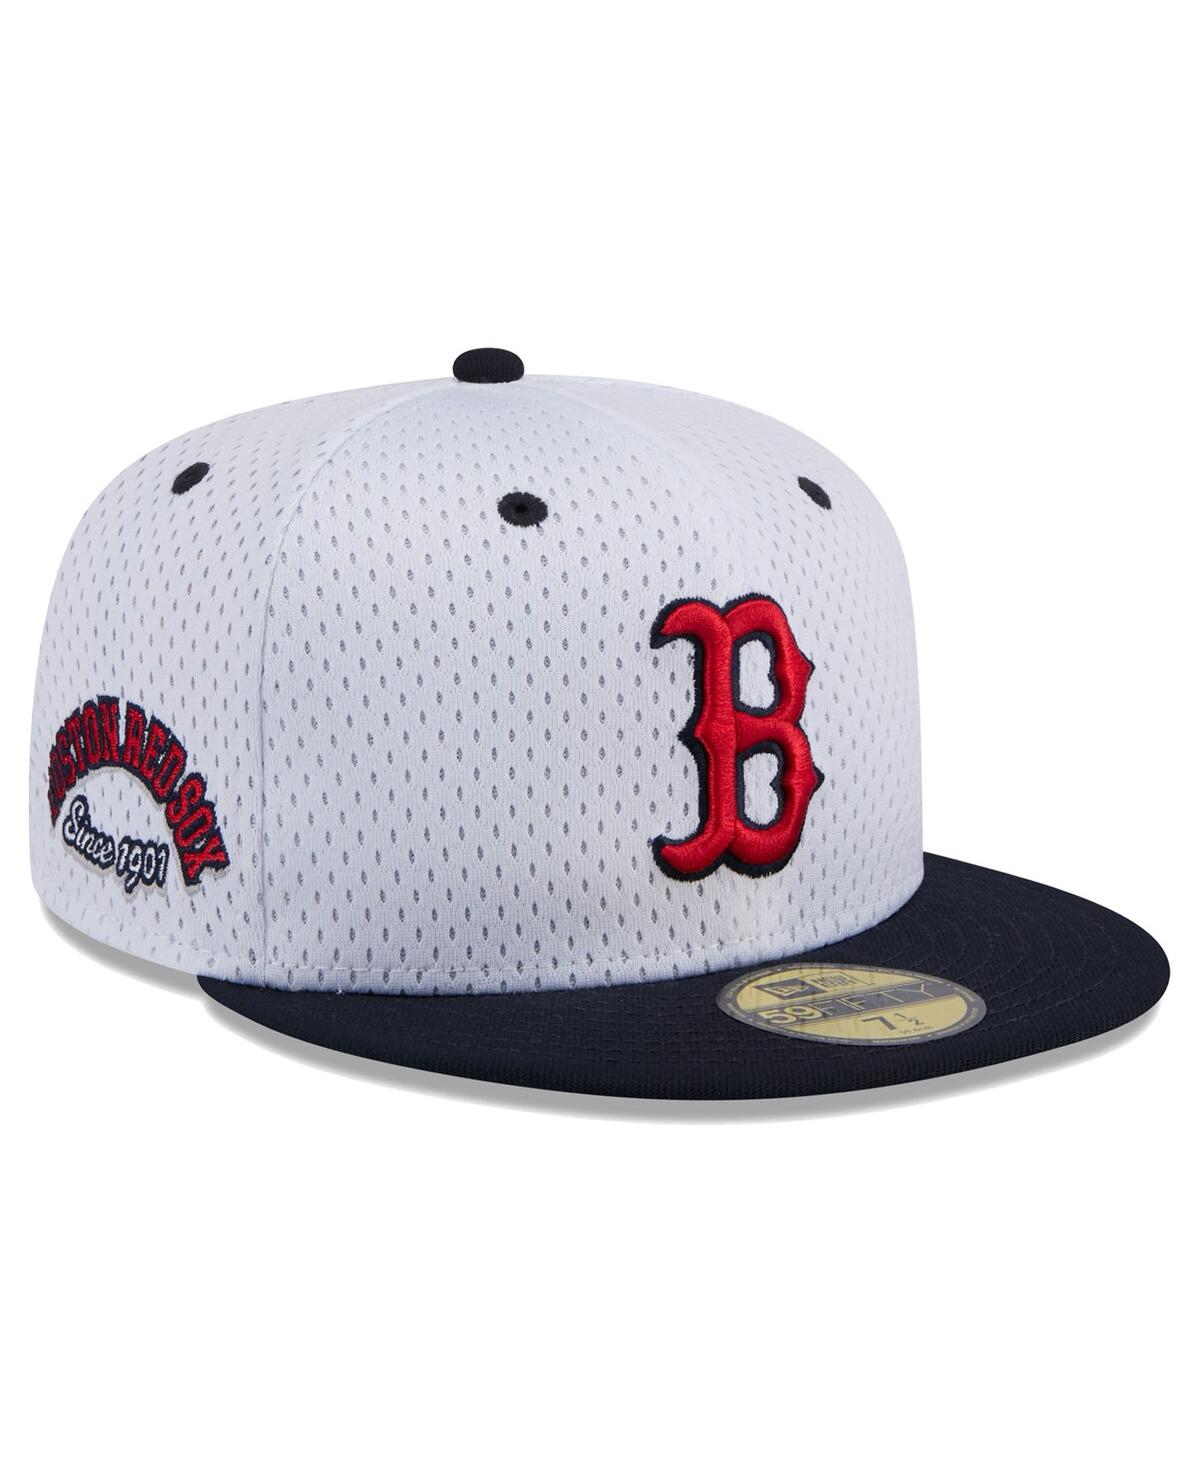 Men's White Boston Red Sox Throwback Mesh 59fifty Fitted Hat - White Navy